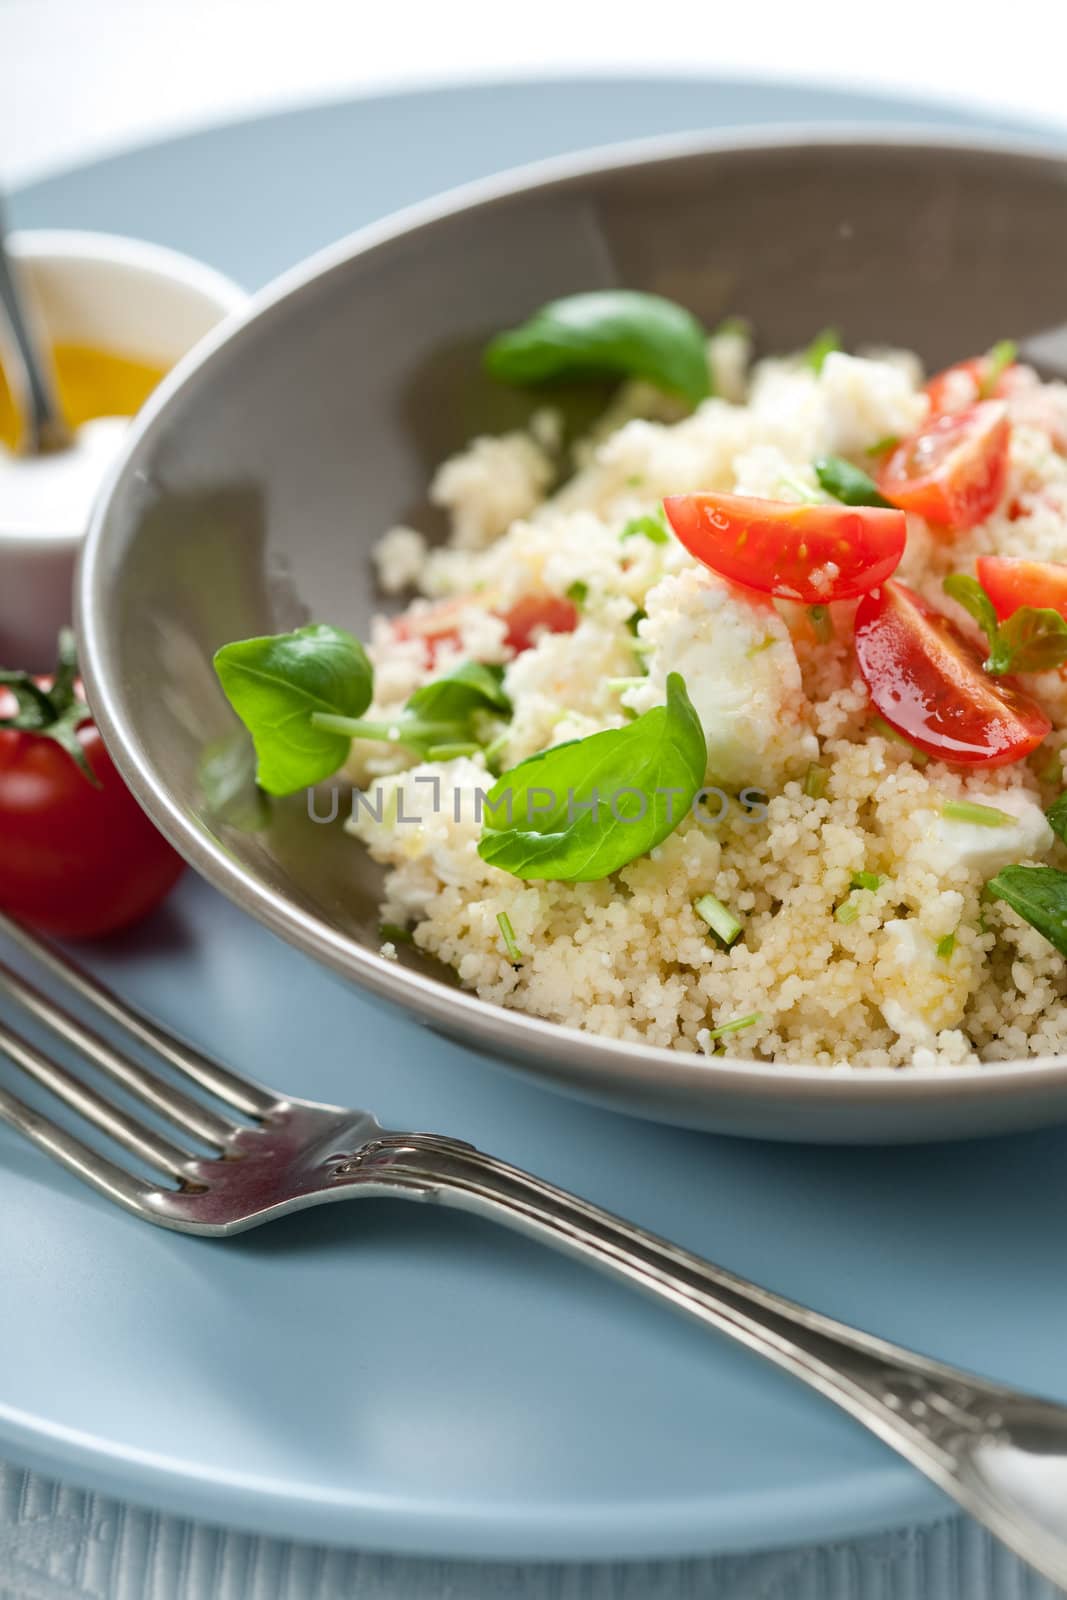 Delicious dish with fresh couscous salad and cherry tomatoes